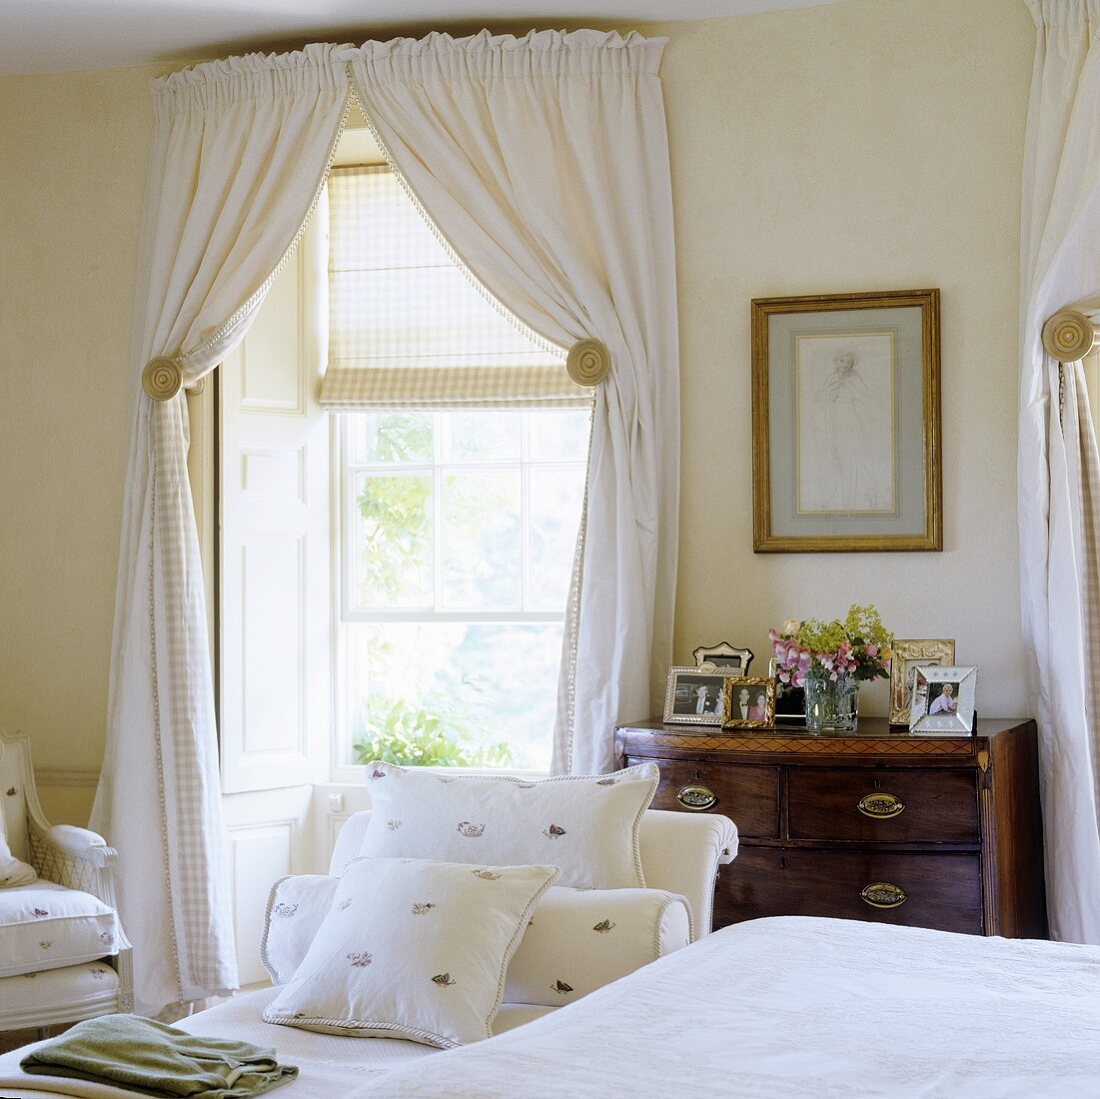 An elegant, country-house style bedroom with a white curtains and a blind at the window